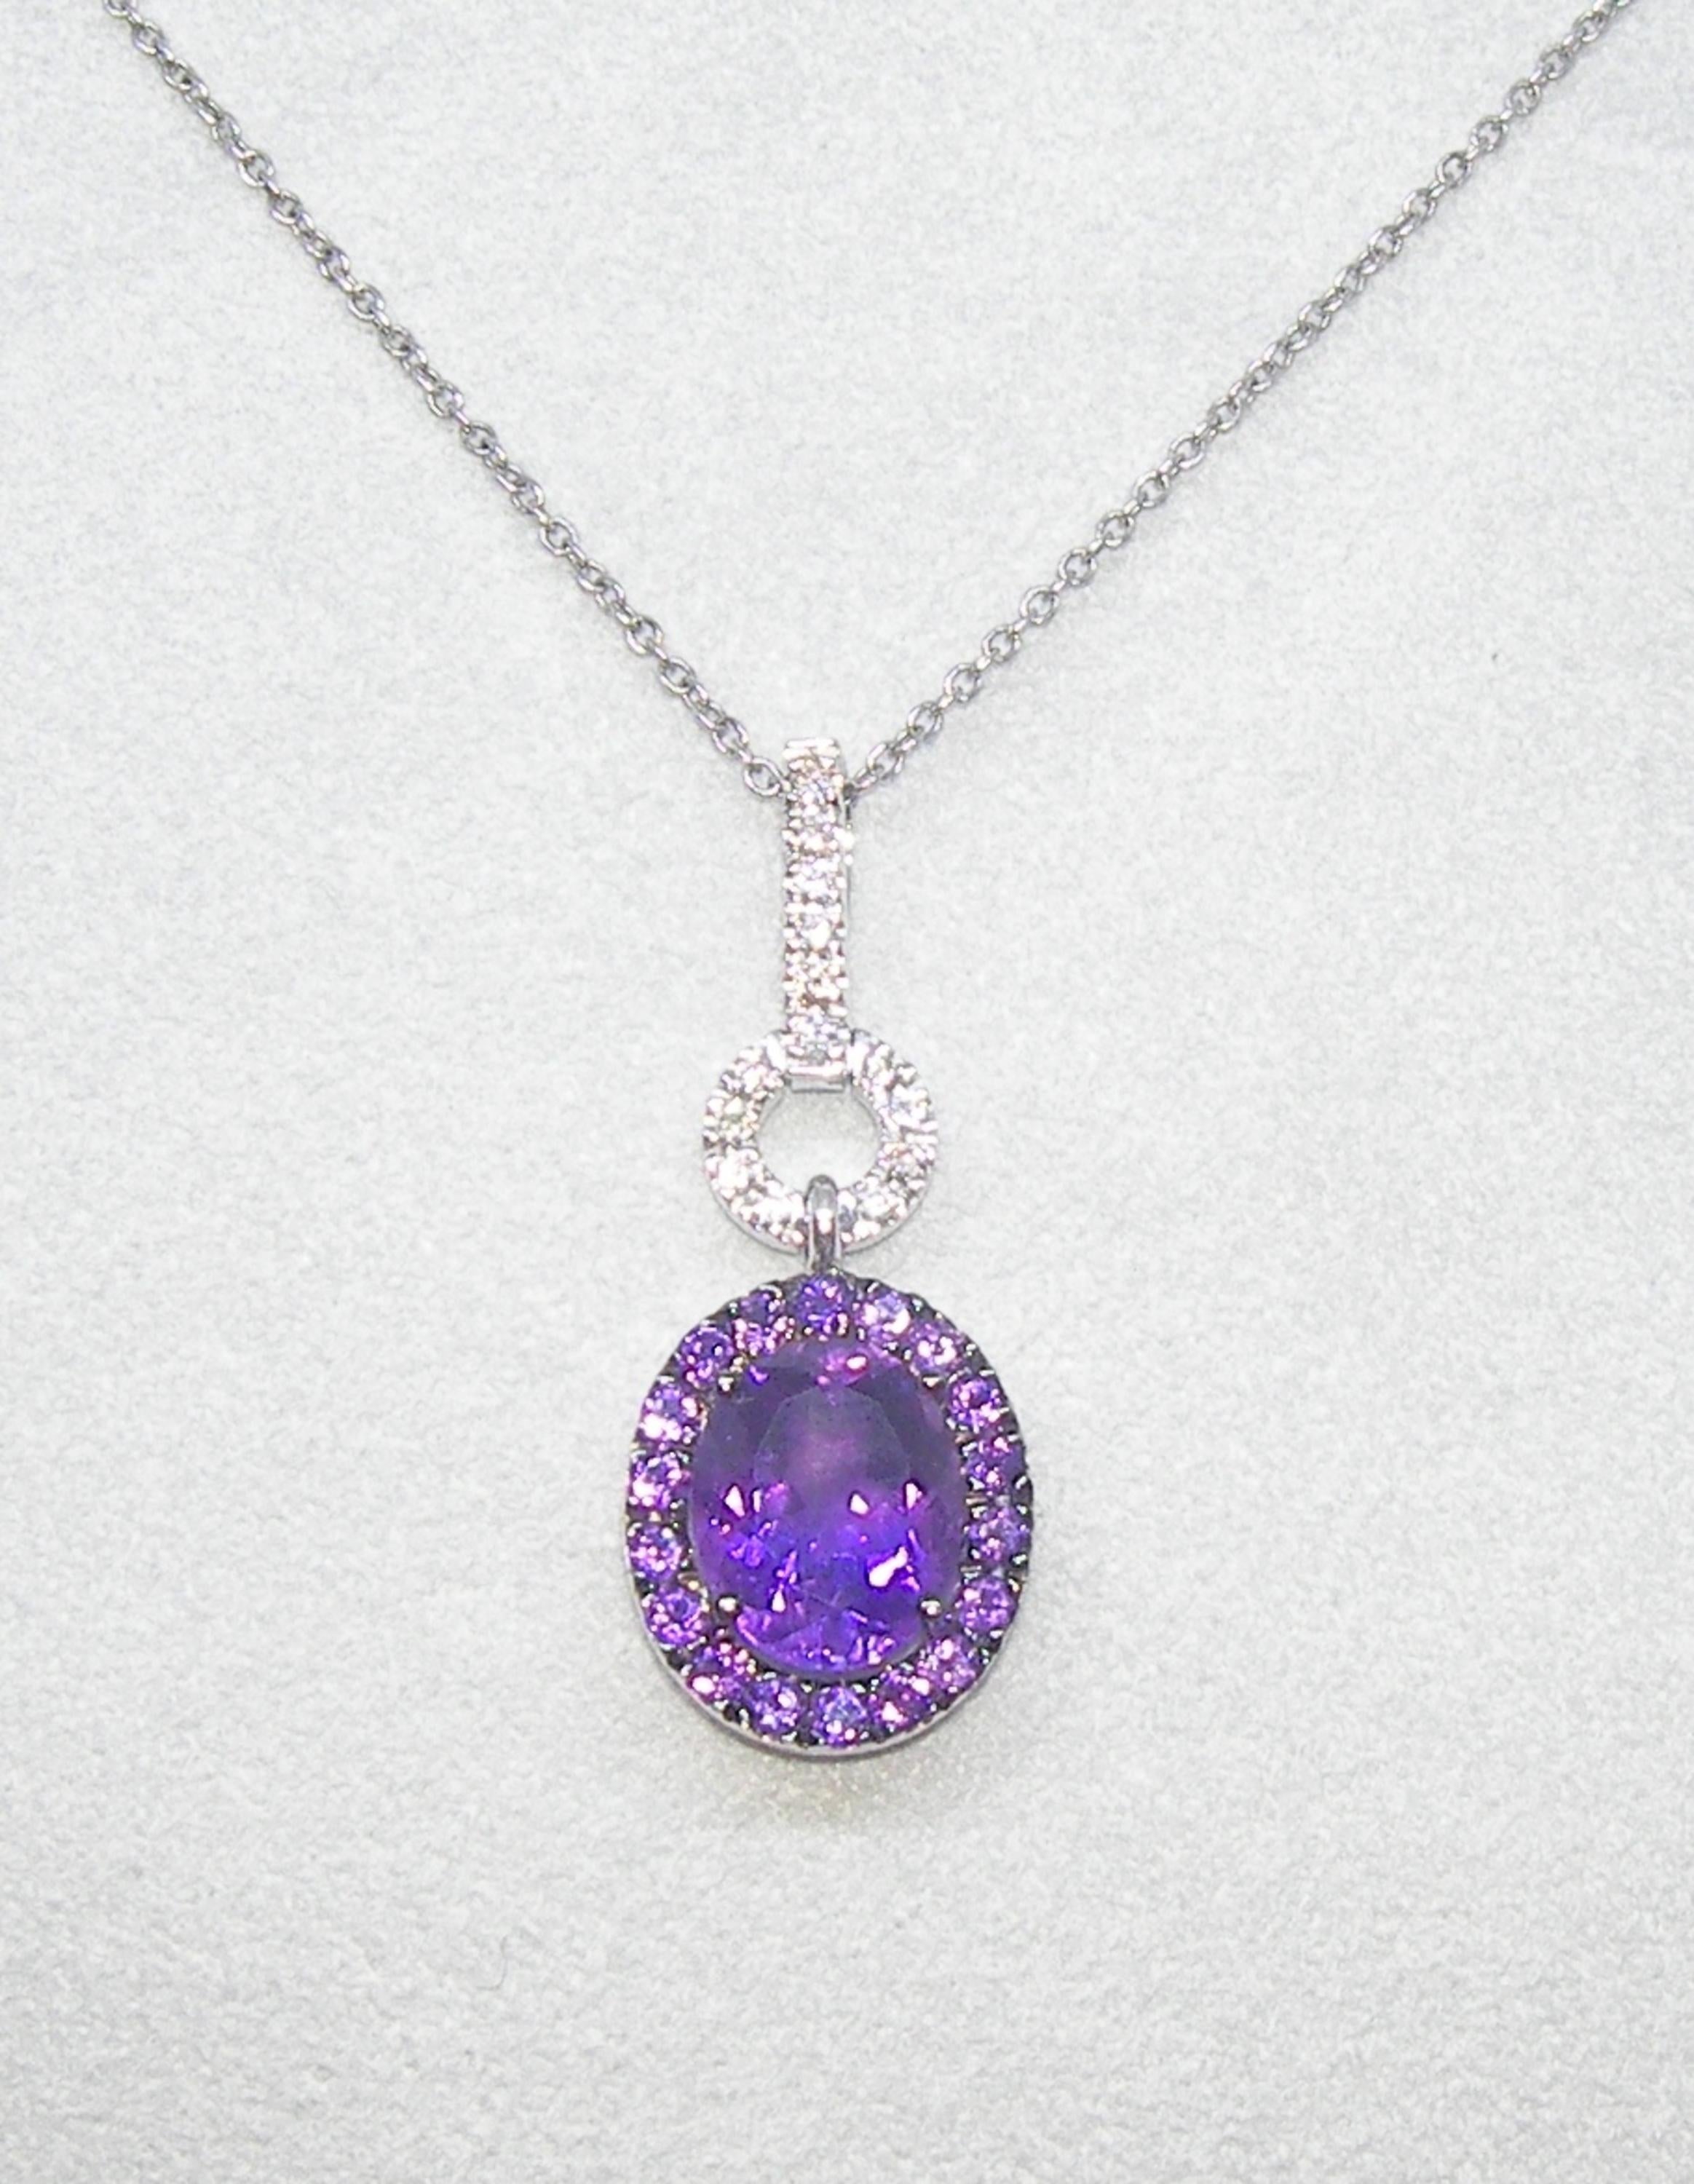 Oval Cut 18 Karat White Gold Diamond and Amethyst Pendant with Chain For Sale